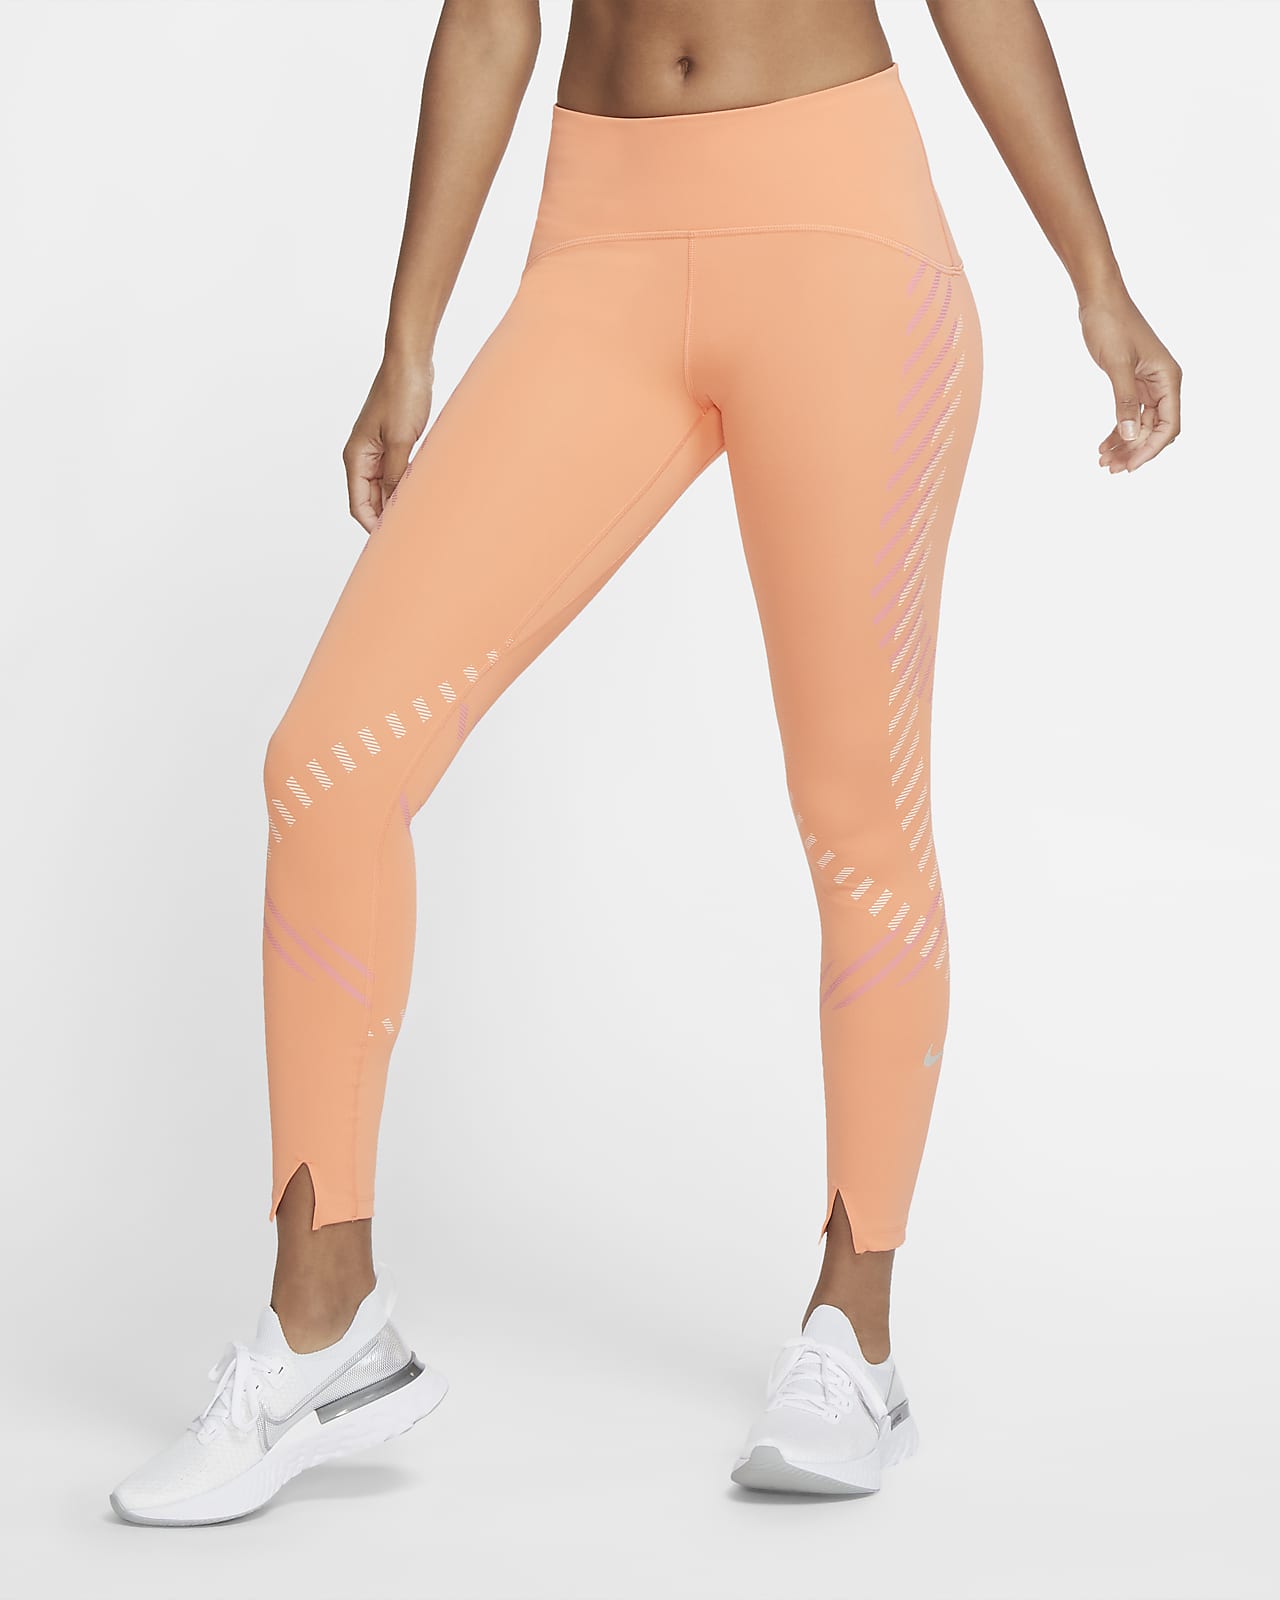 nike speed tights review